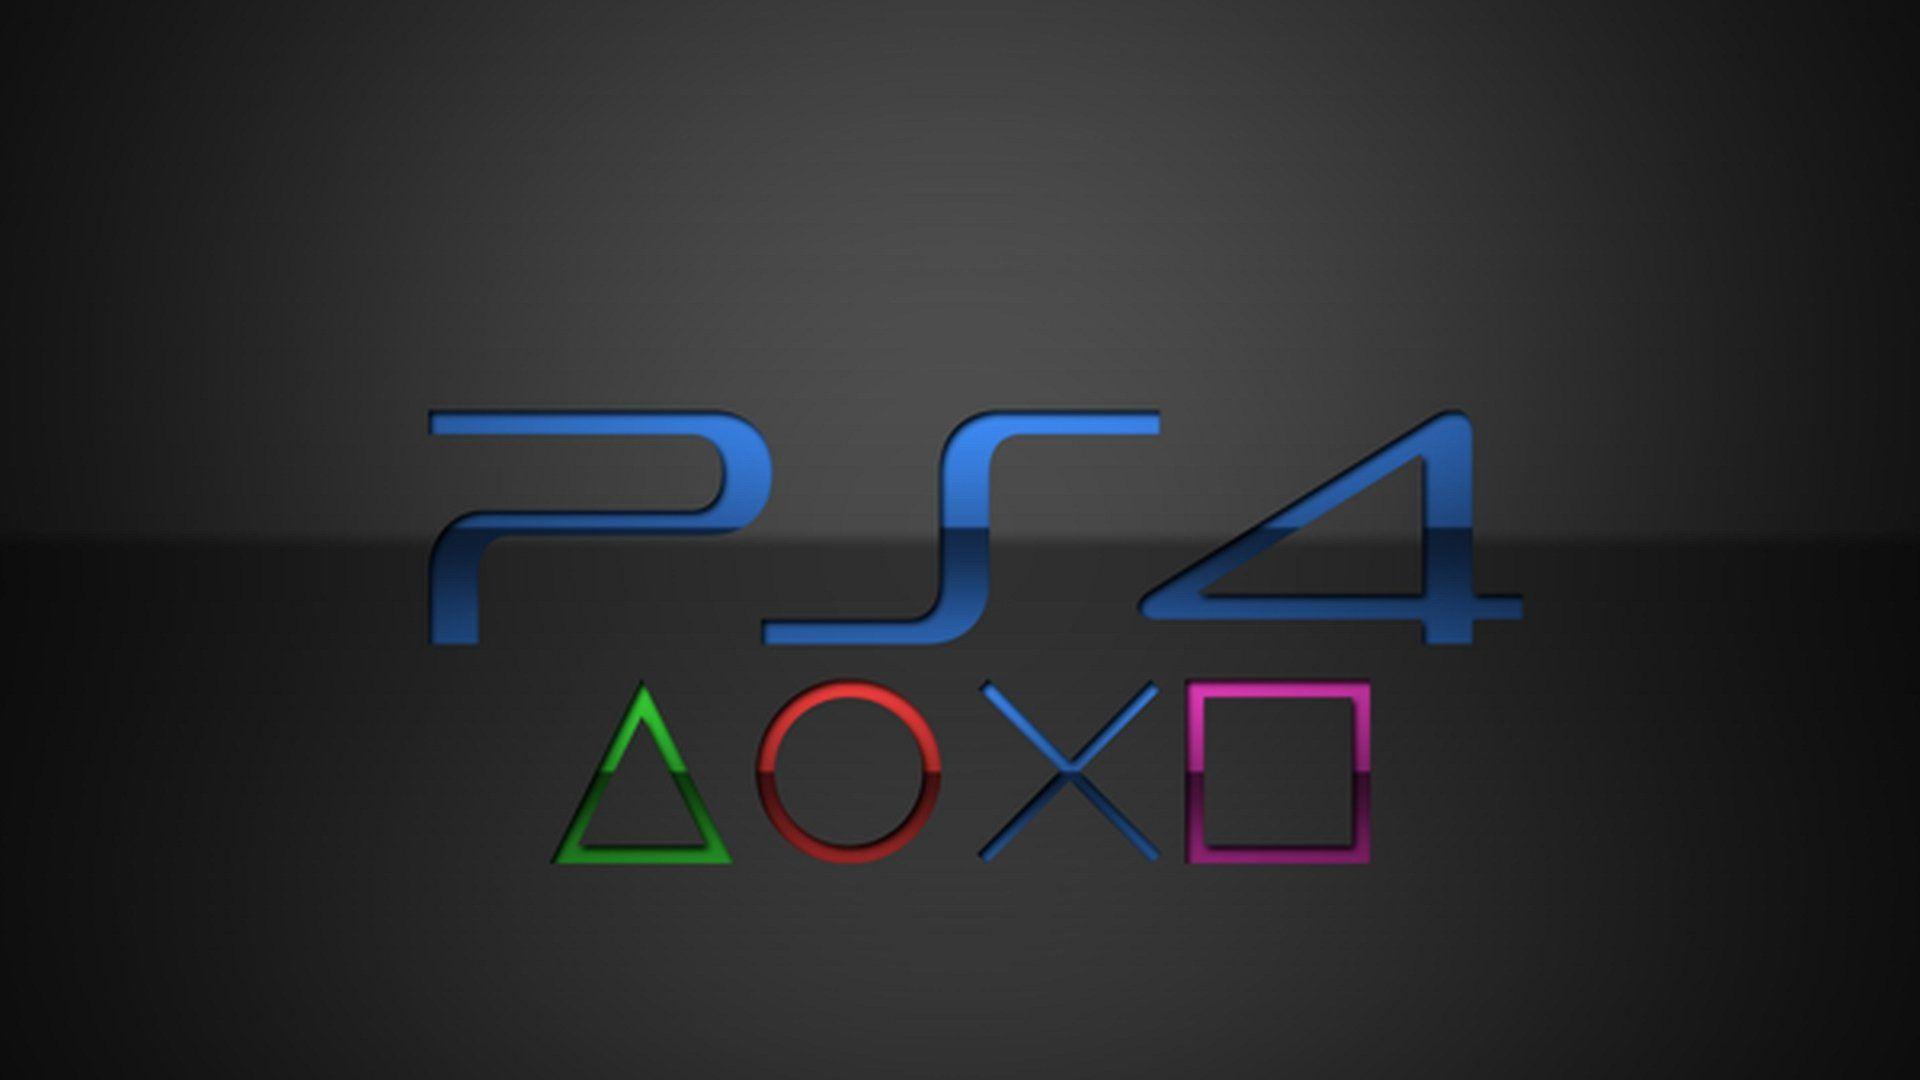 Sony PlayStation 4 Logo - Sony PlayStation 4 Wallpapers, Pictures, Images